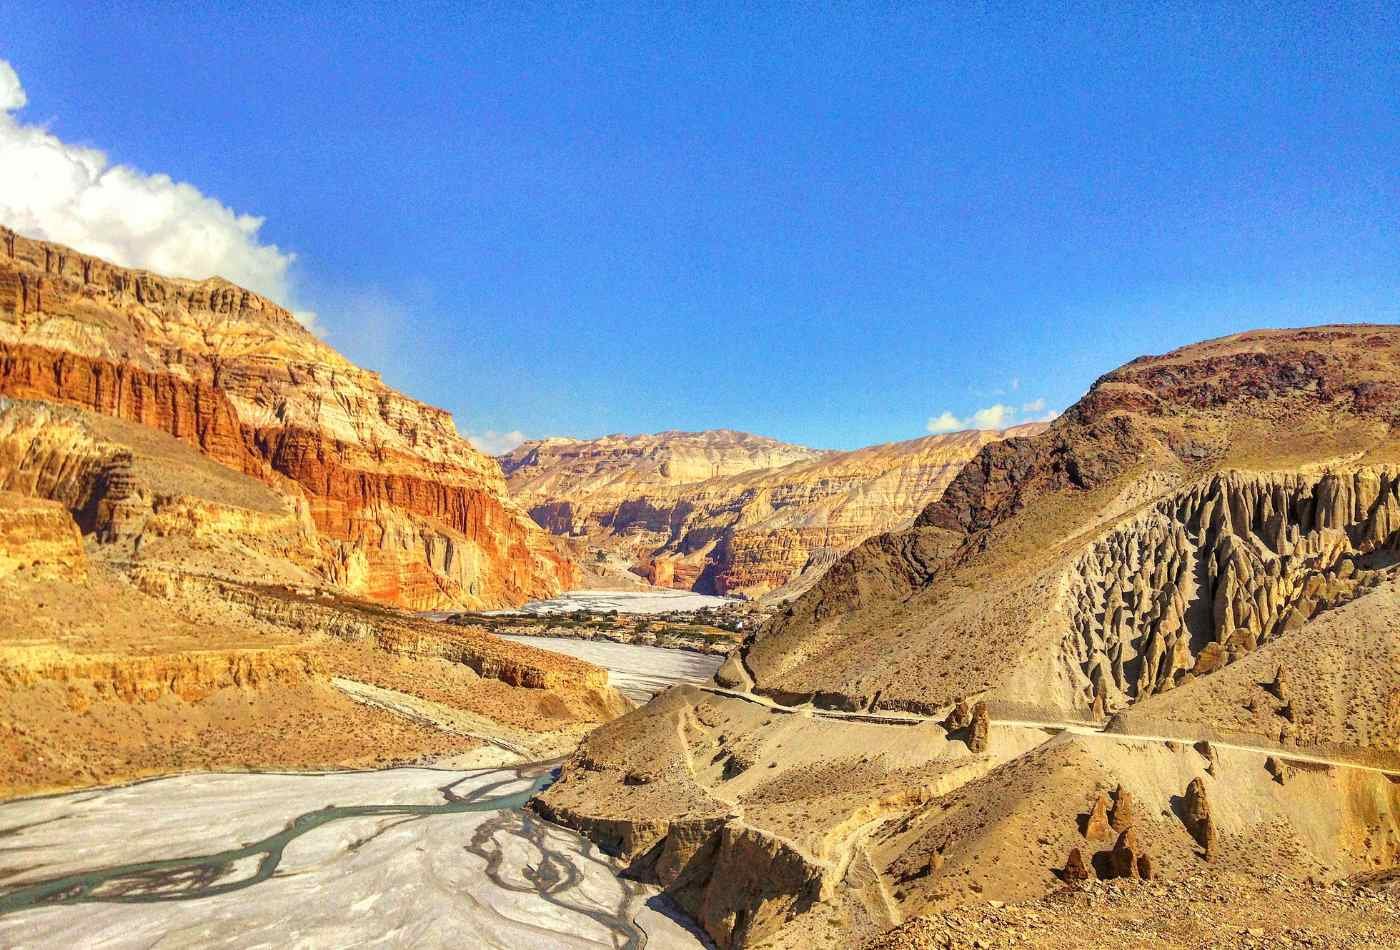 A scenic view of the red and arid hills with the Kali Gandaki River flowing through and a road leading to the remote town of Lo-Mangthang.